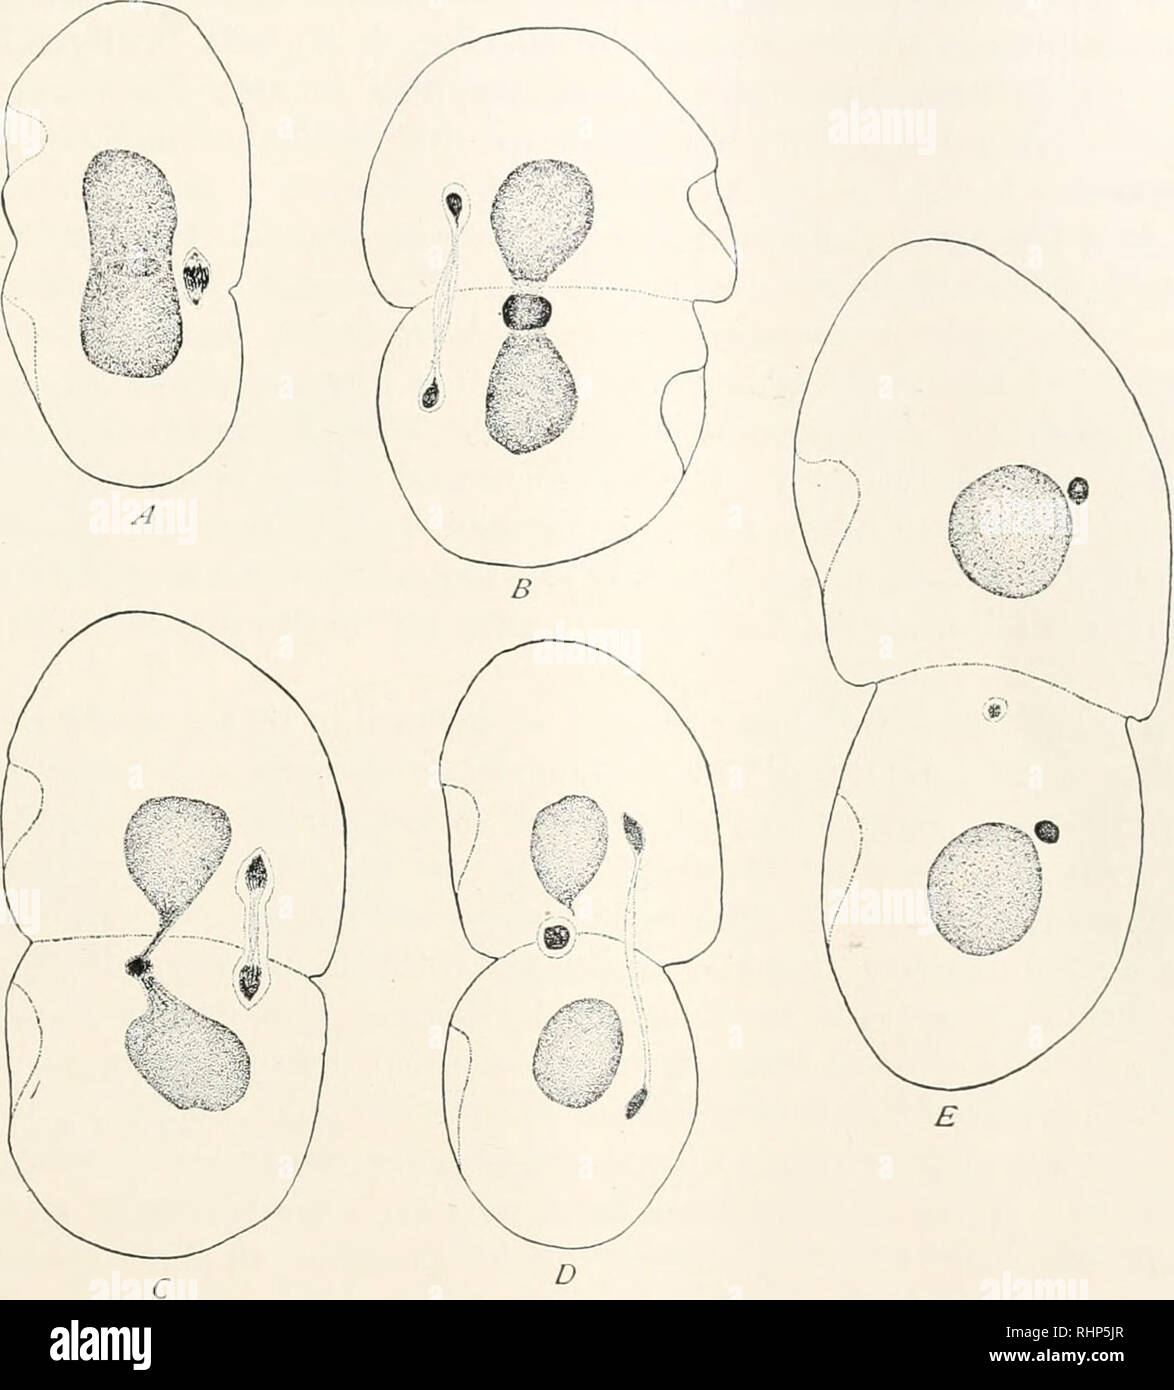 . The Biological bulletin. Biology; Zoology; Biology; Marine Biology. CILIATES FROM FRESH WATER MUSSELS 291. FIG. 2. The macronucleus of Conchaphthirius anodontcc during binary fission. Camera lucida drawings. X511. A. Earliest evidence of the formation of the ball of residual chromatin. Gilson-Carnoy's fluid—Heidenhain's hrematoxylin. B. Residual ball somewhat contracted and lying between the separating halves of the macronucleus. Schaudinn's fluid—Heidenhain's hsematoxylin. C. Further contraction of the residual ball and separation of the macronuclear halves. Schaudinn's fluid—Heidenhain's h Stock Photo